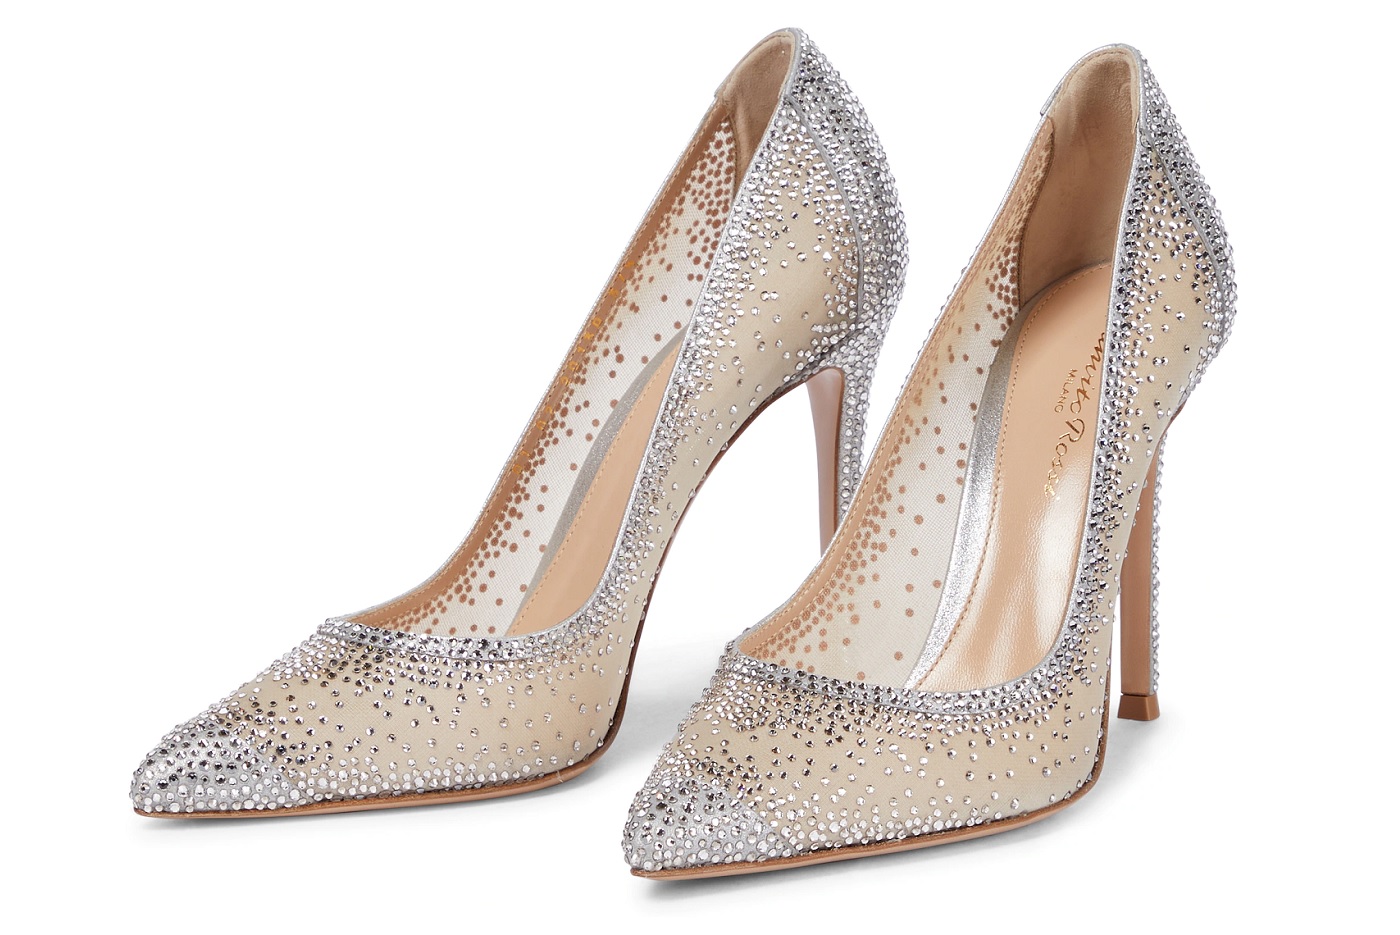 The Duchess of Cambridge wore Gianvito Rossi Rania 105 embellished pumps